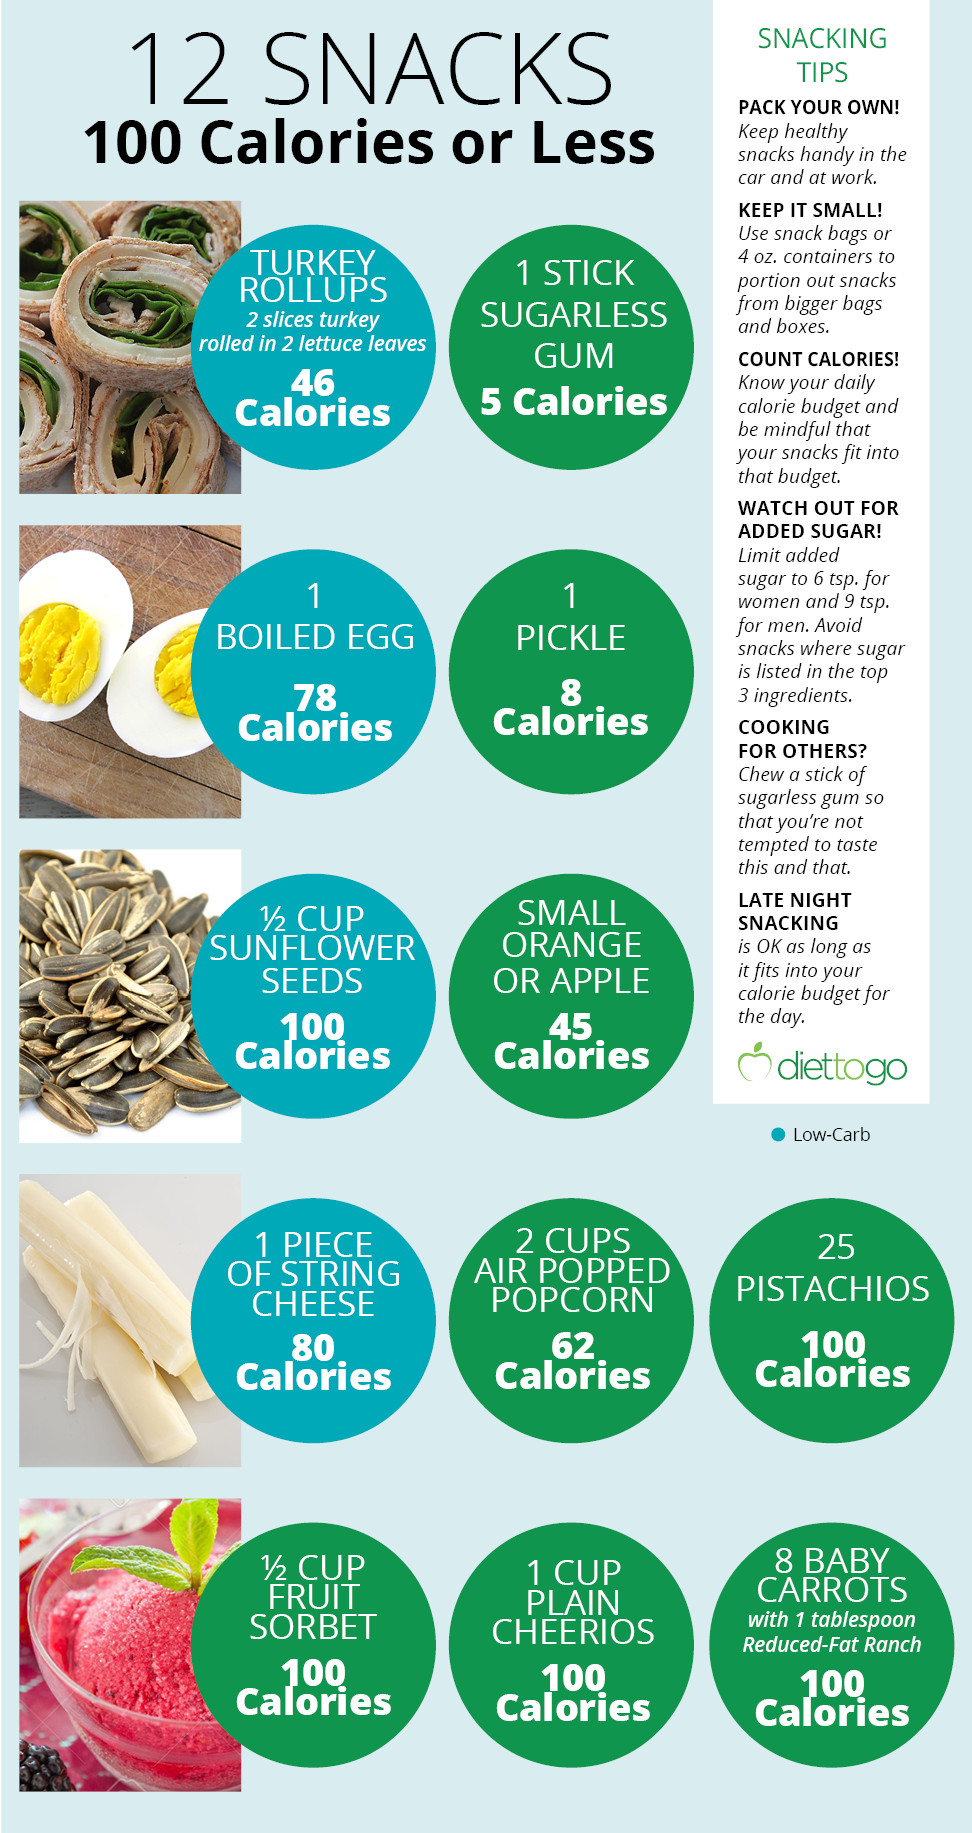 100 Calorie Low Carb Snacks
 12 Healthy Snacks for 100 Calories or Less